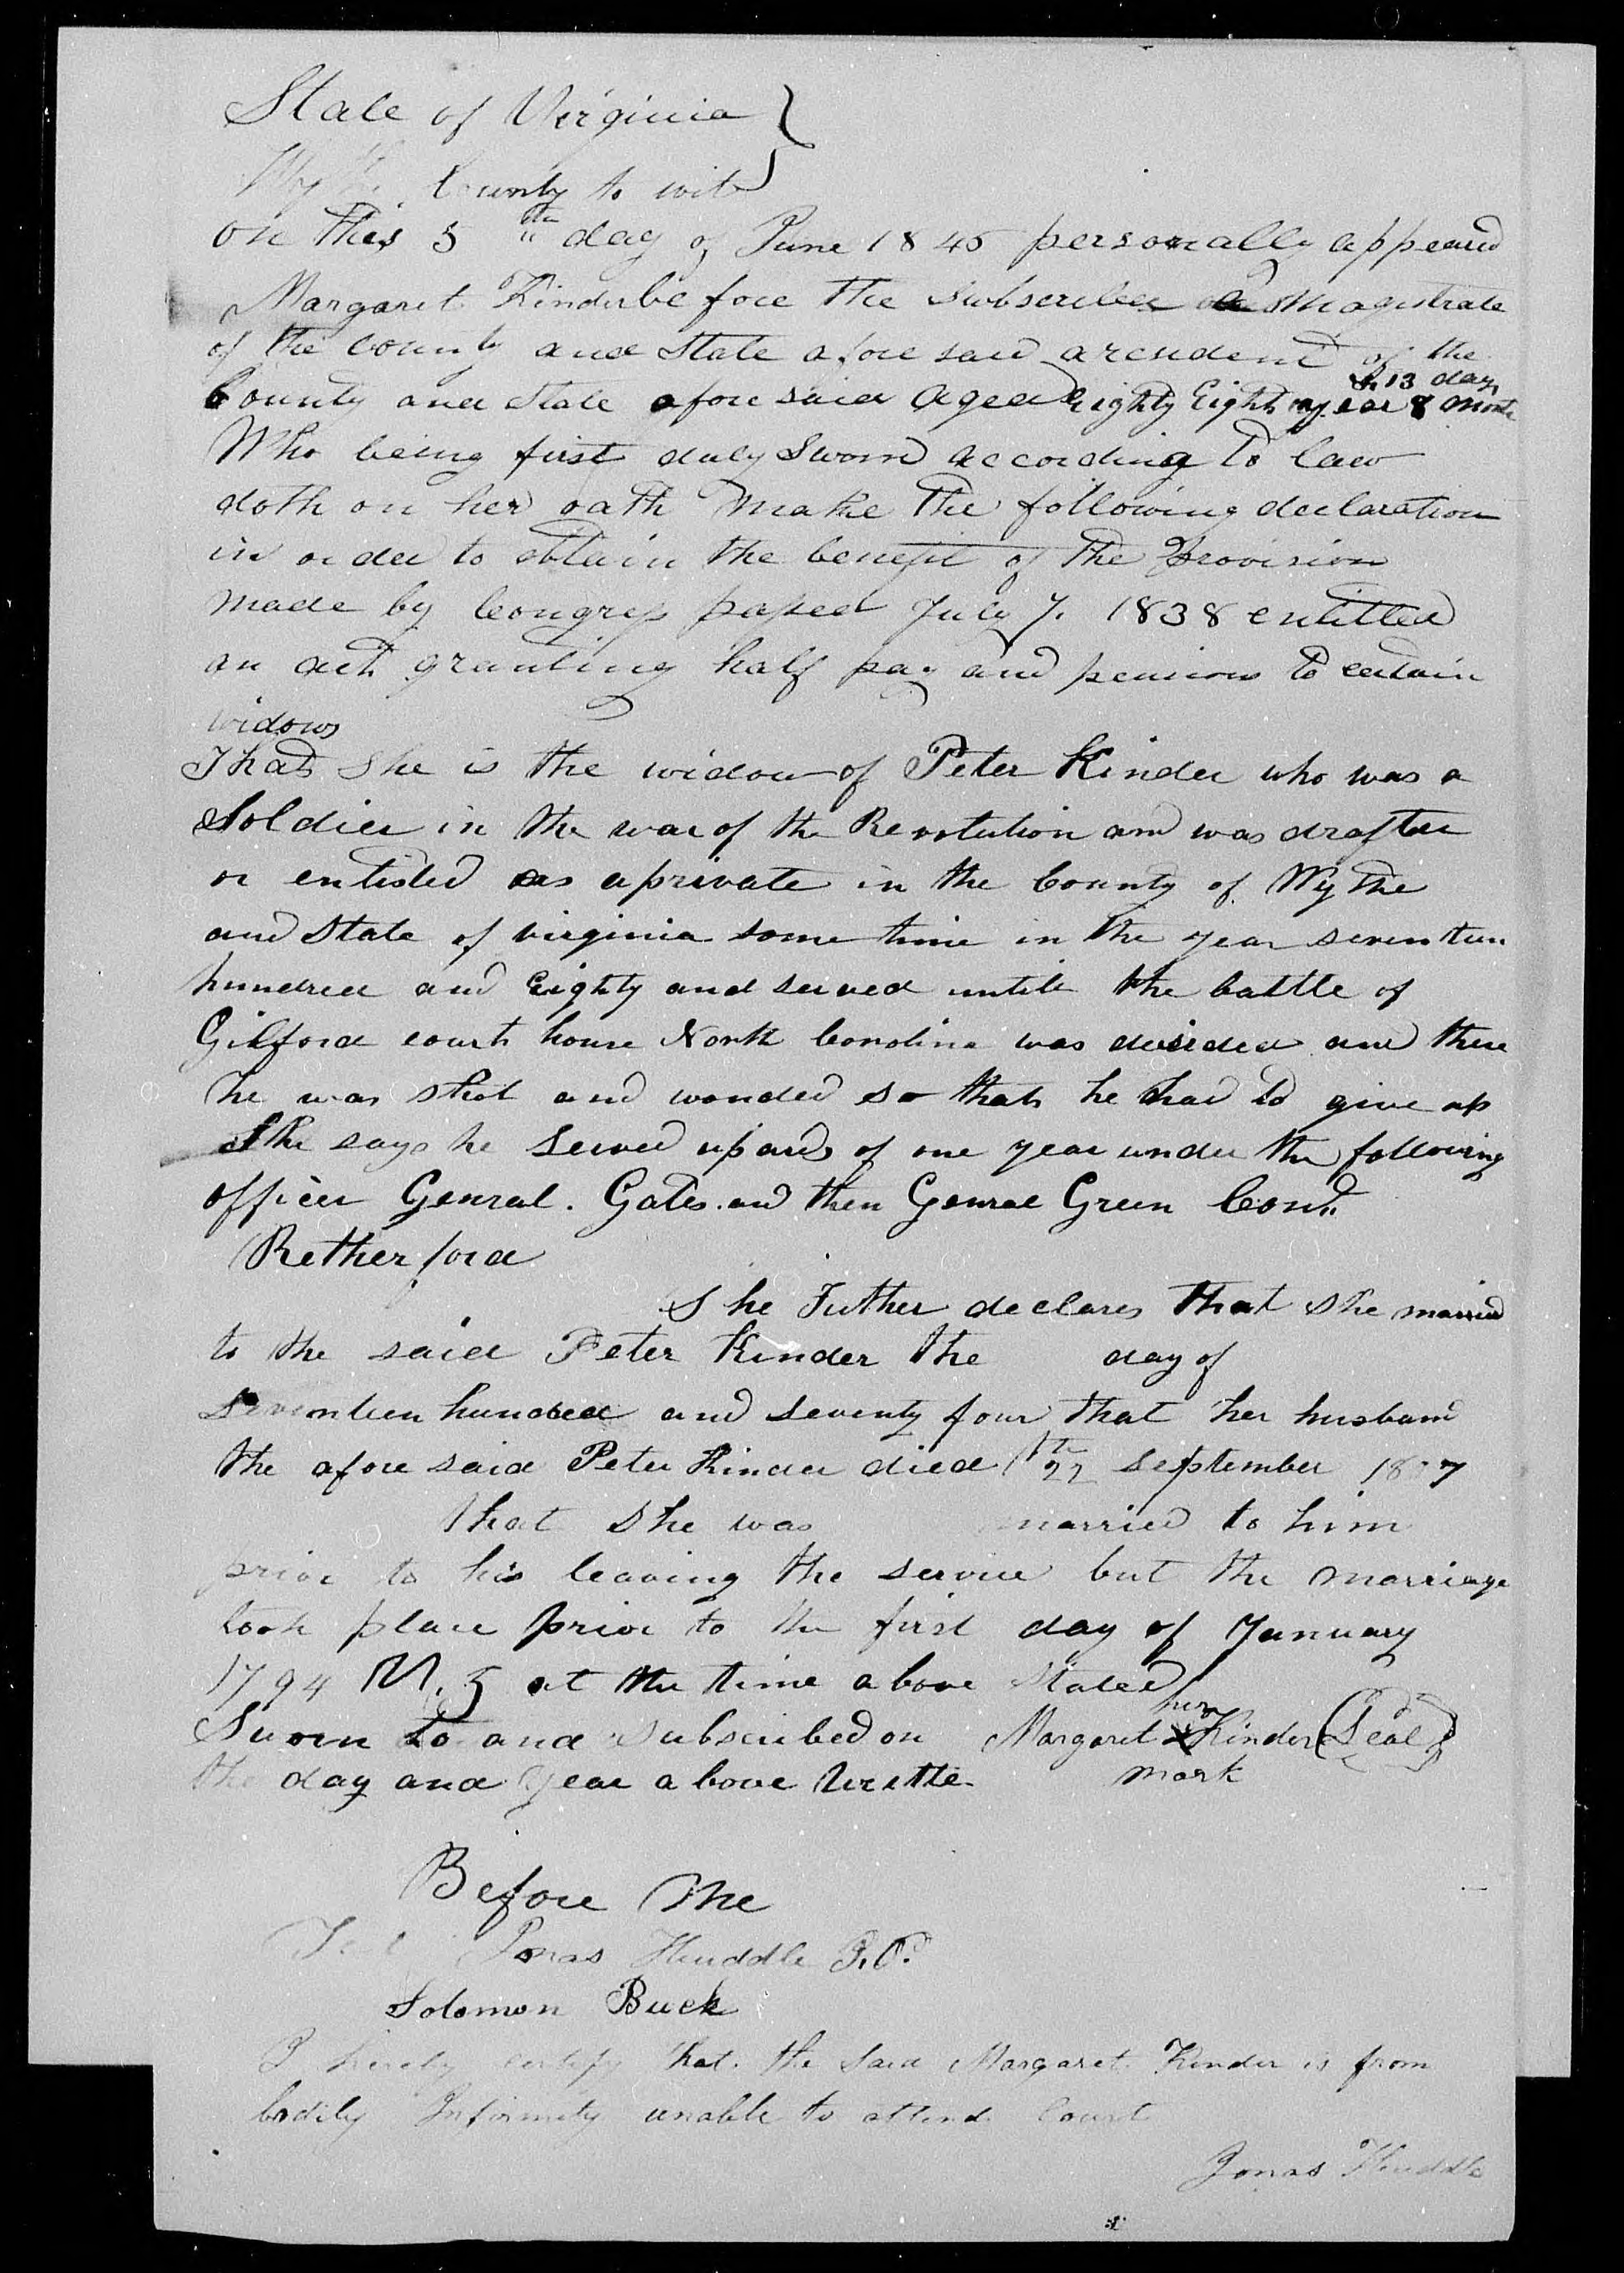 Application for a Widow's Pension from Margaret Kinder, 5 June 1845, page 1